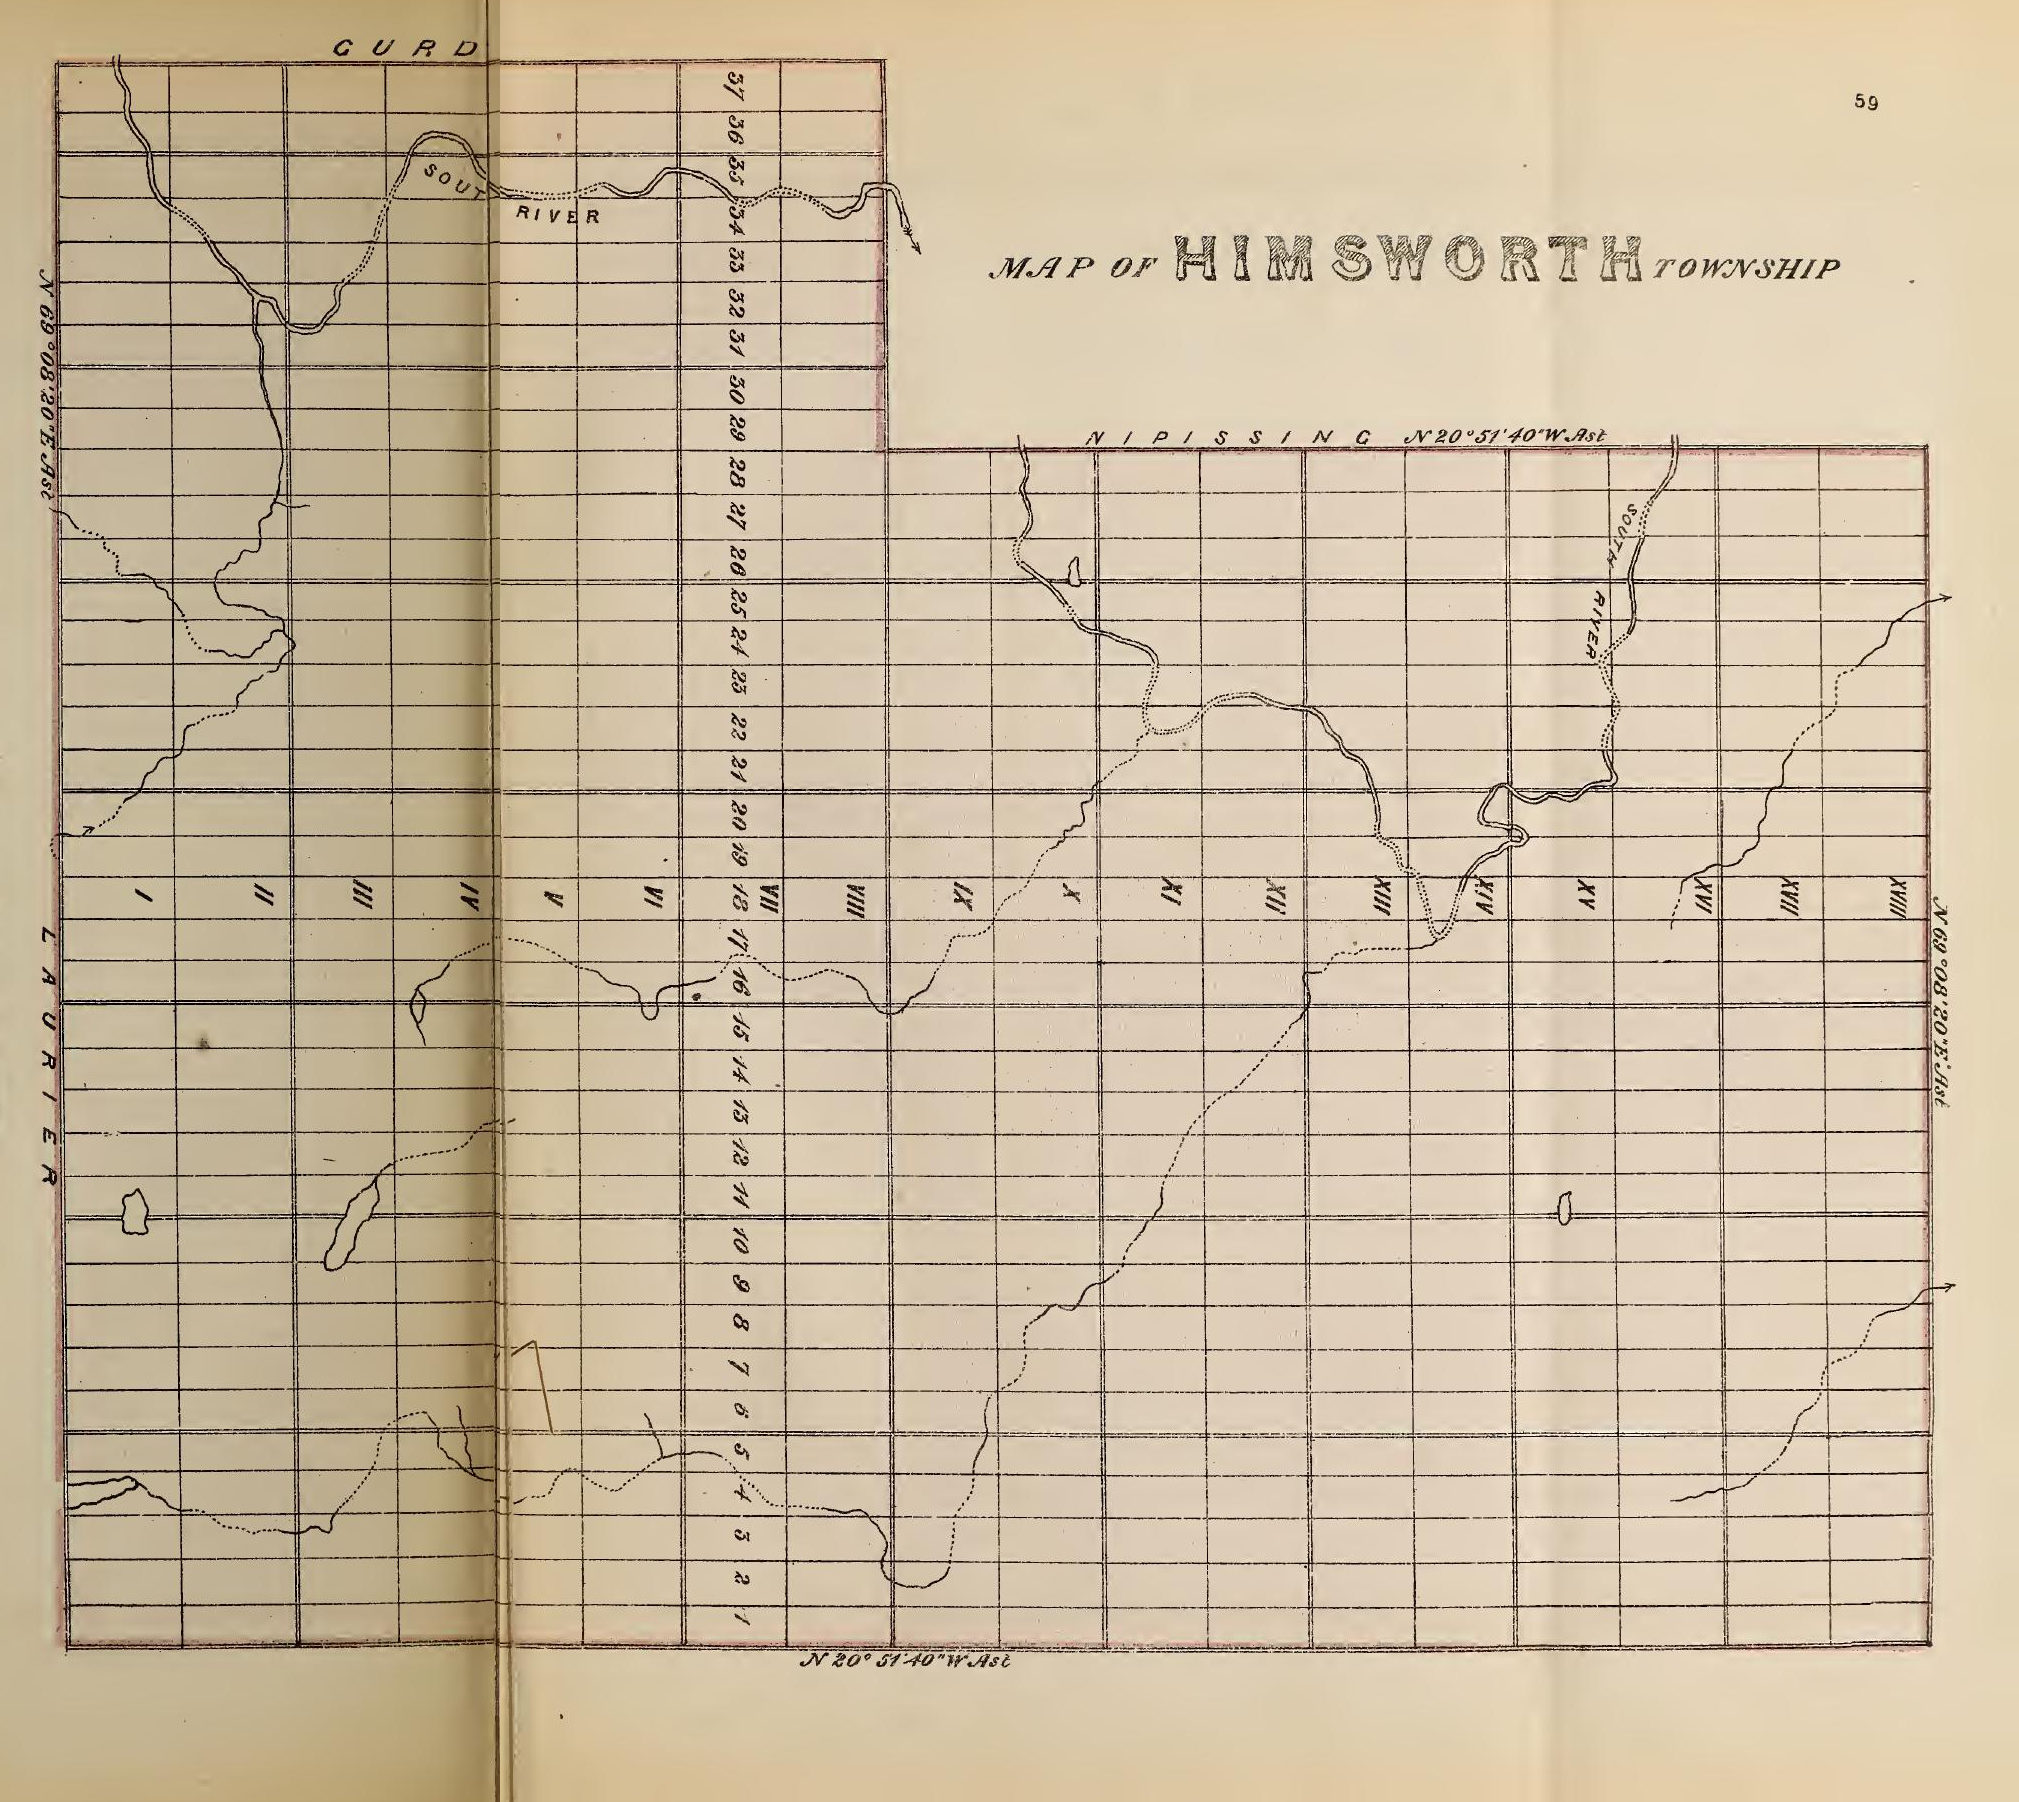 Historical map showing Concessions and Lots for himsworth Township